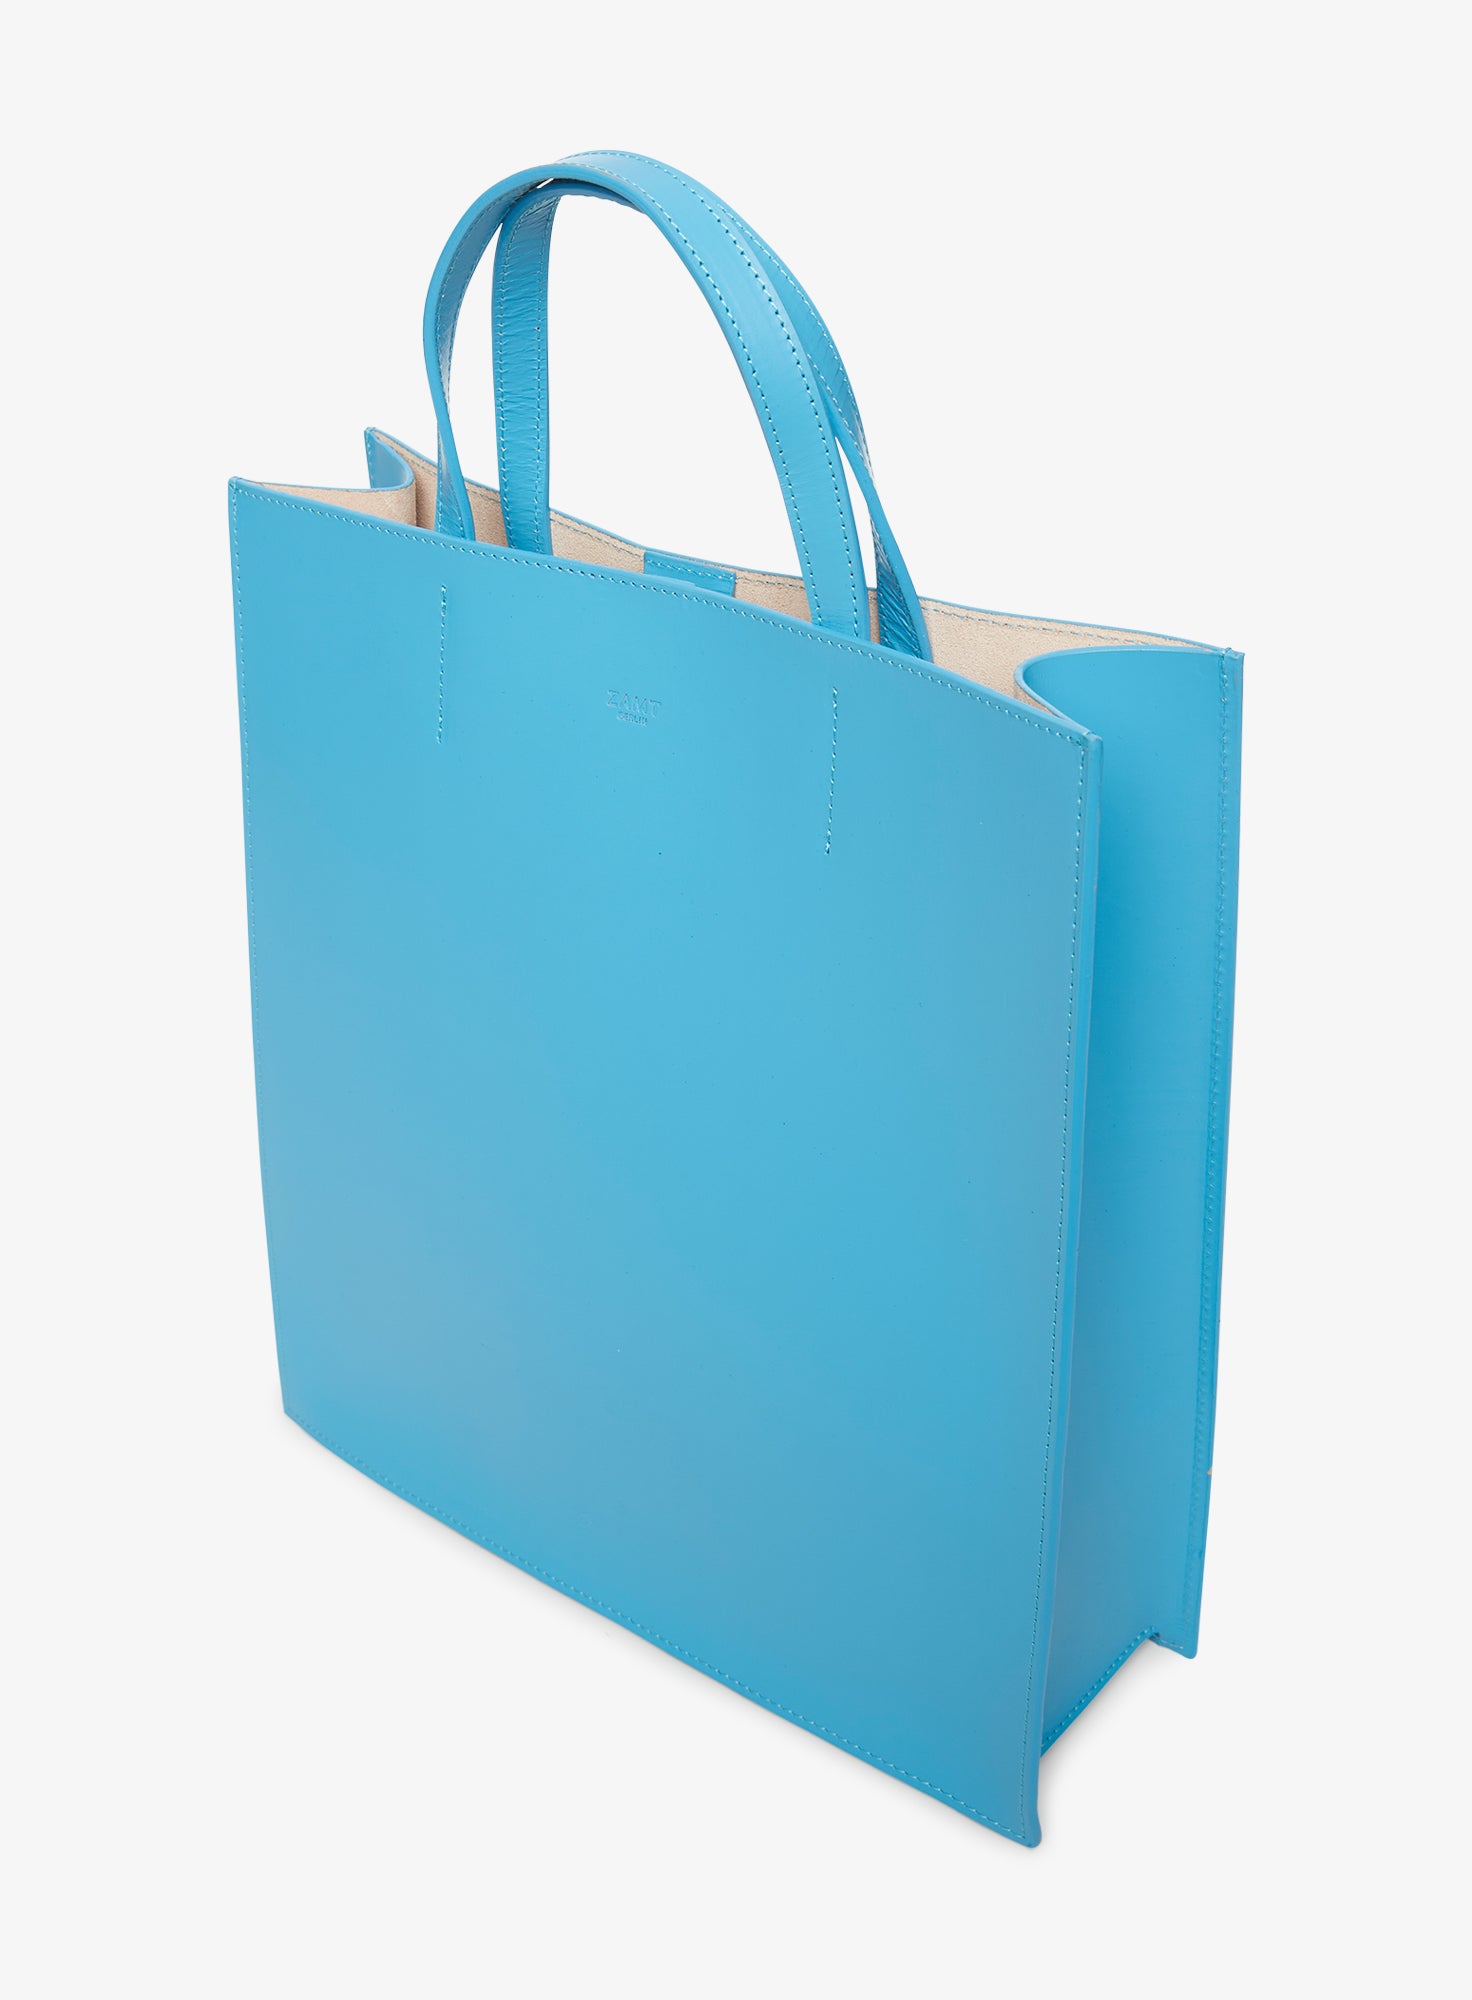 CONTAINER_BAG_FINCH_BLUE_Designed_in_Berlin_Made_to_last_Handmade_in_Poland.